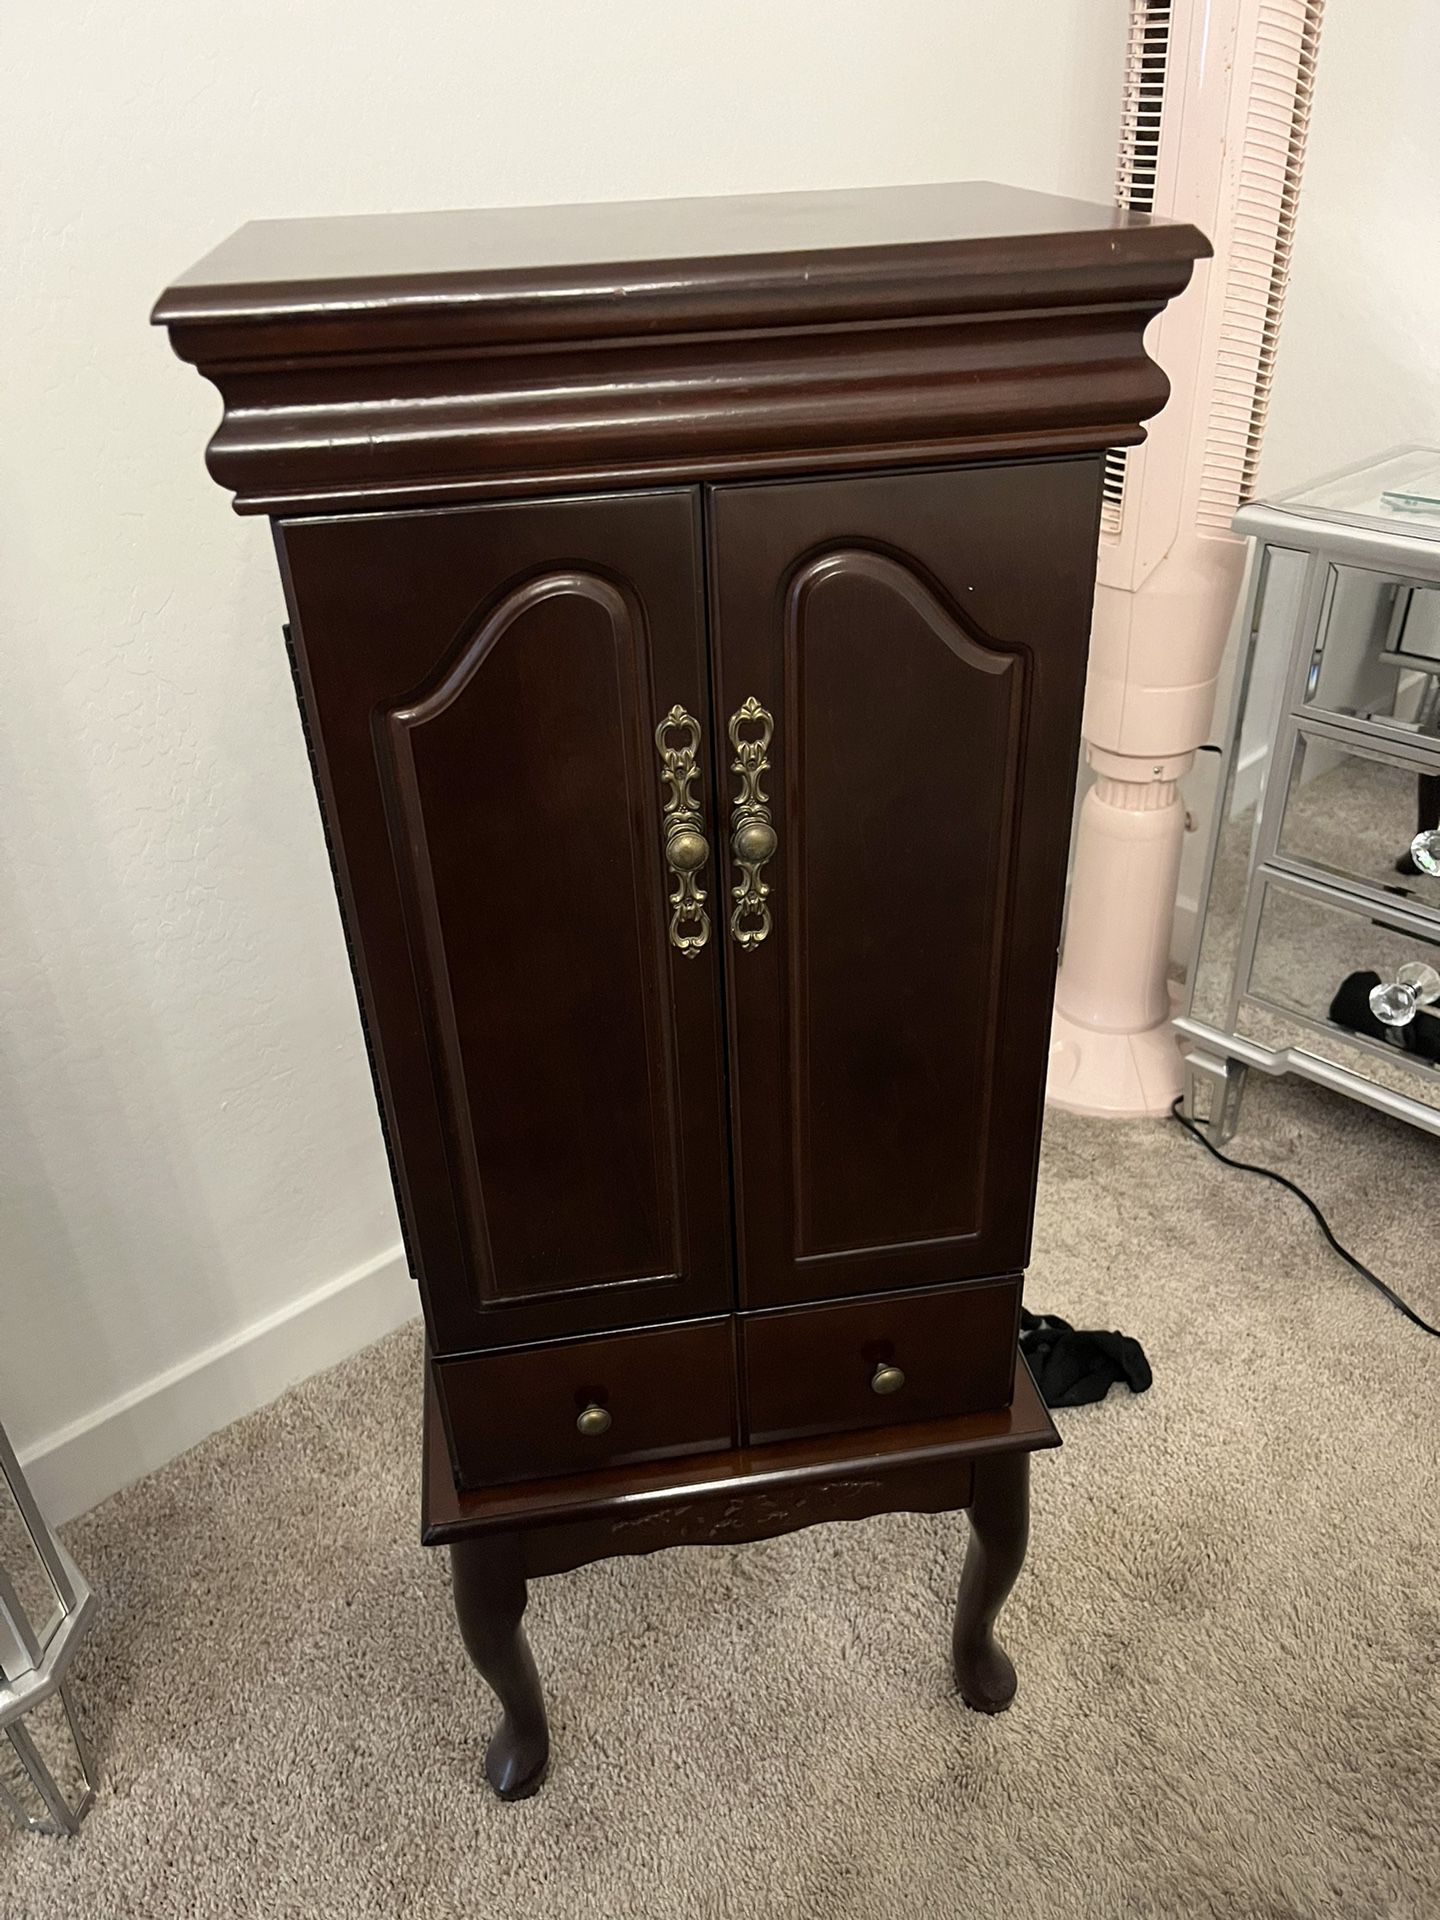  Vintage Queen Anne Cherry Wood Jewelry Armoire